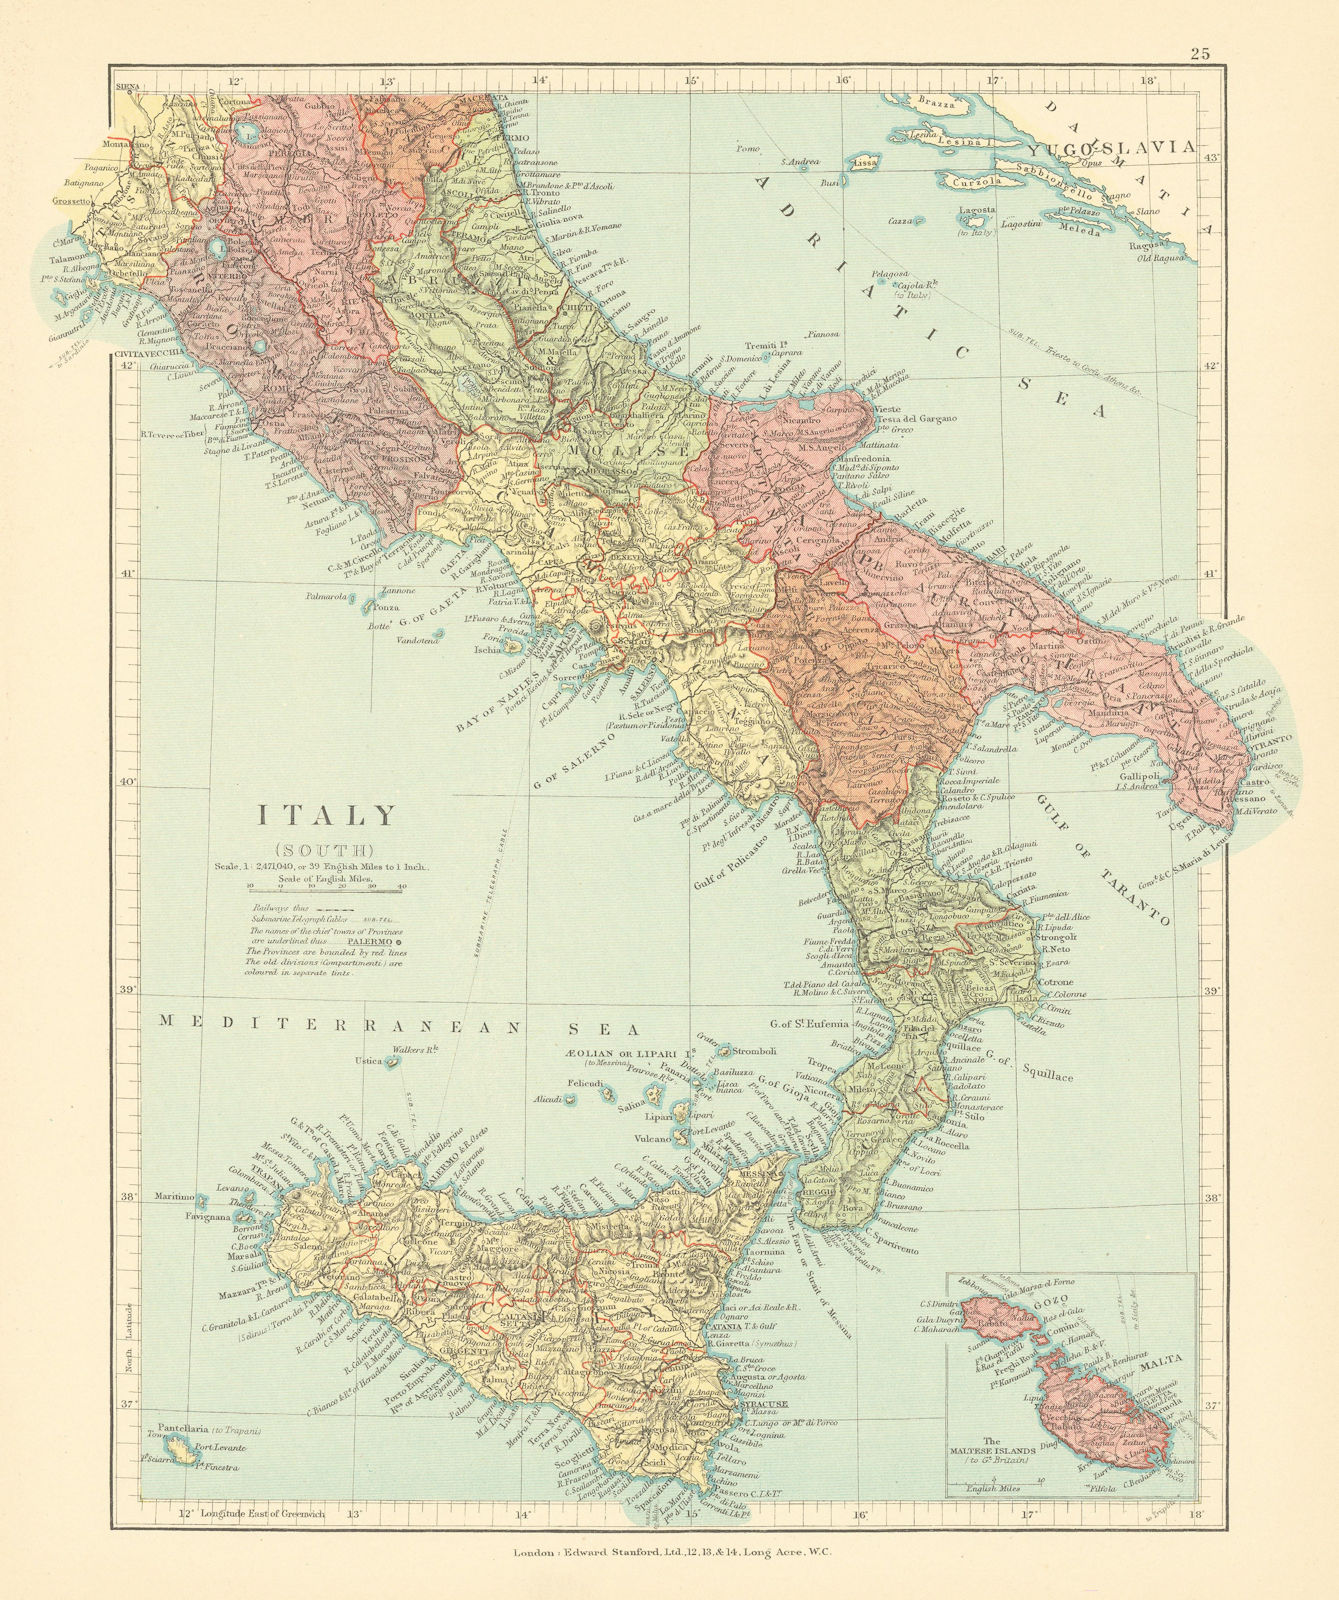 Associate Product Southern Italy in regions. Malta & Gozo. STANFORD c1925 old vintage map chart